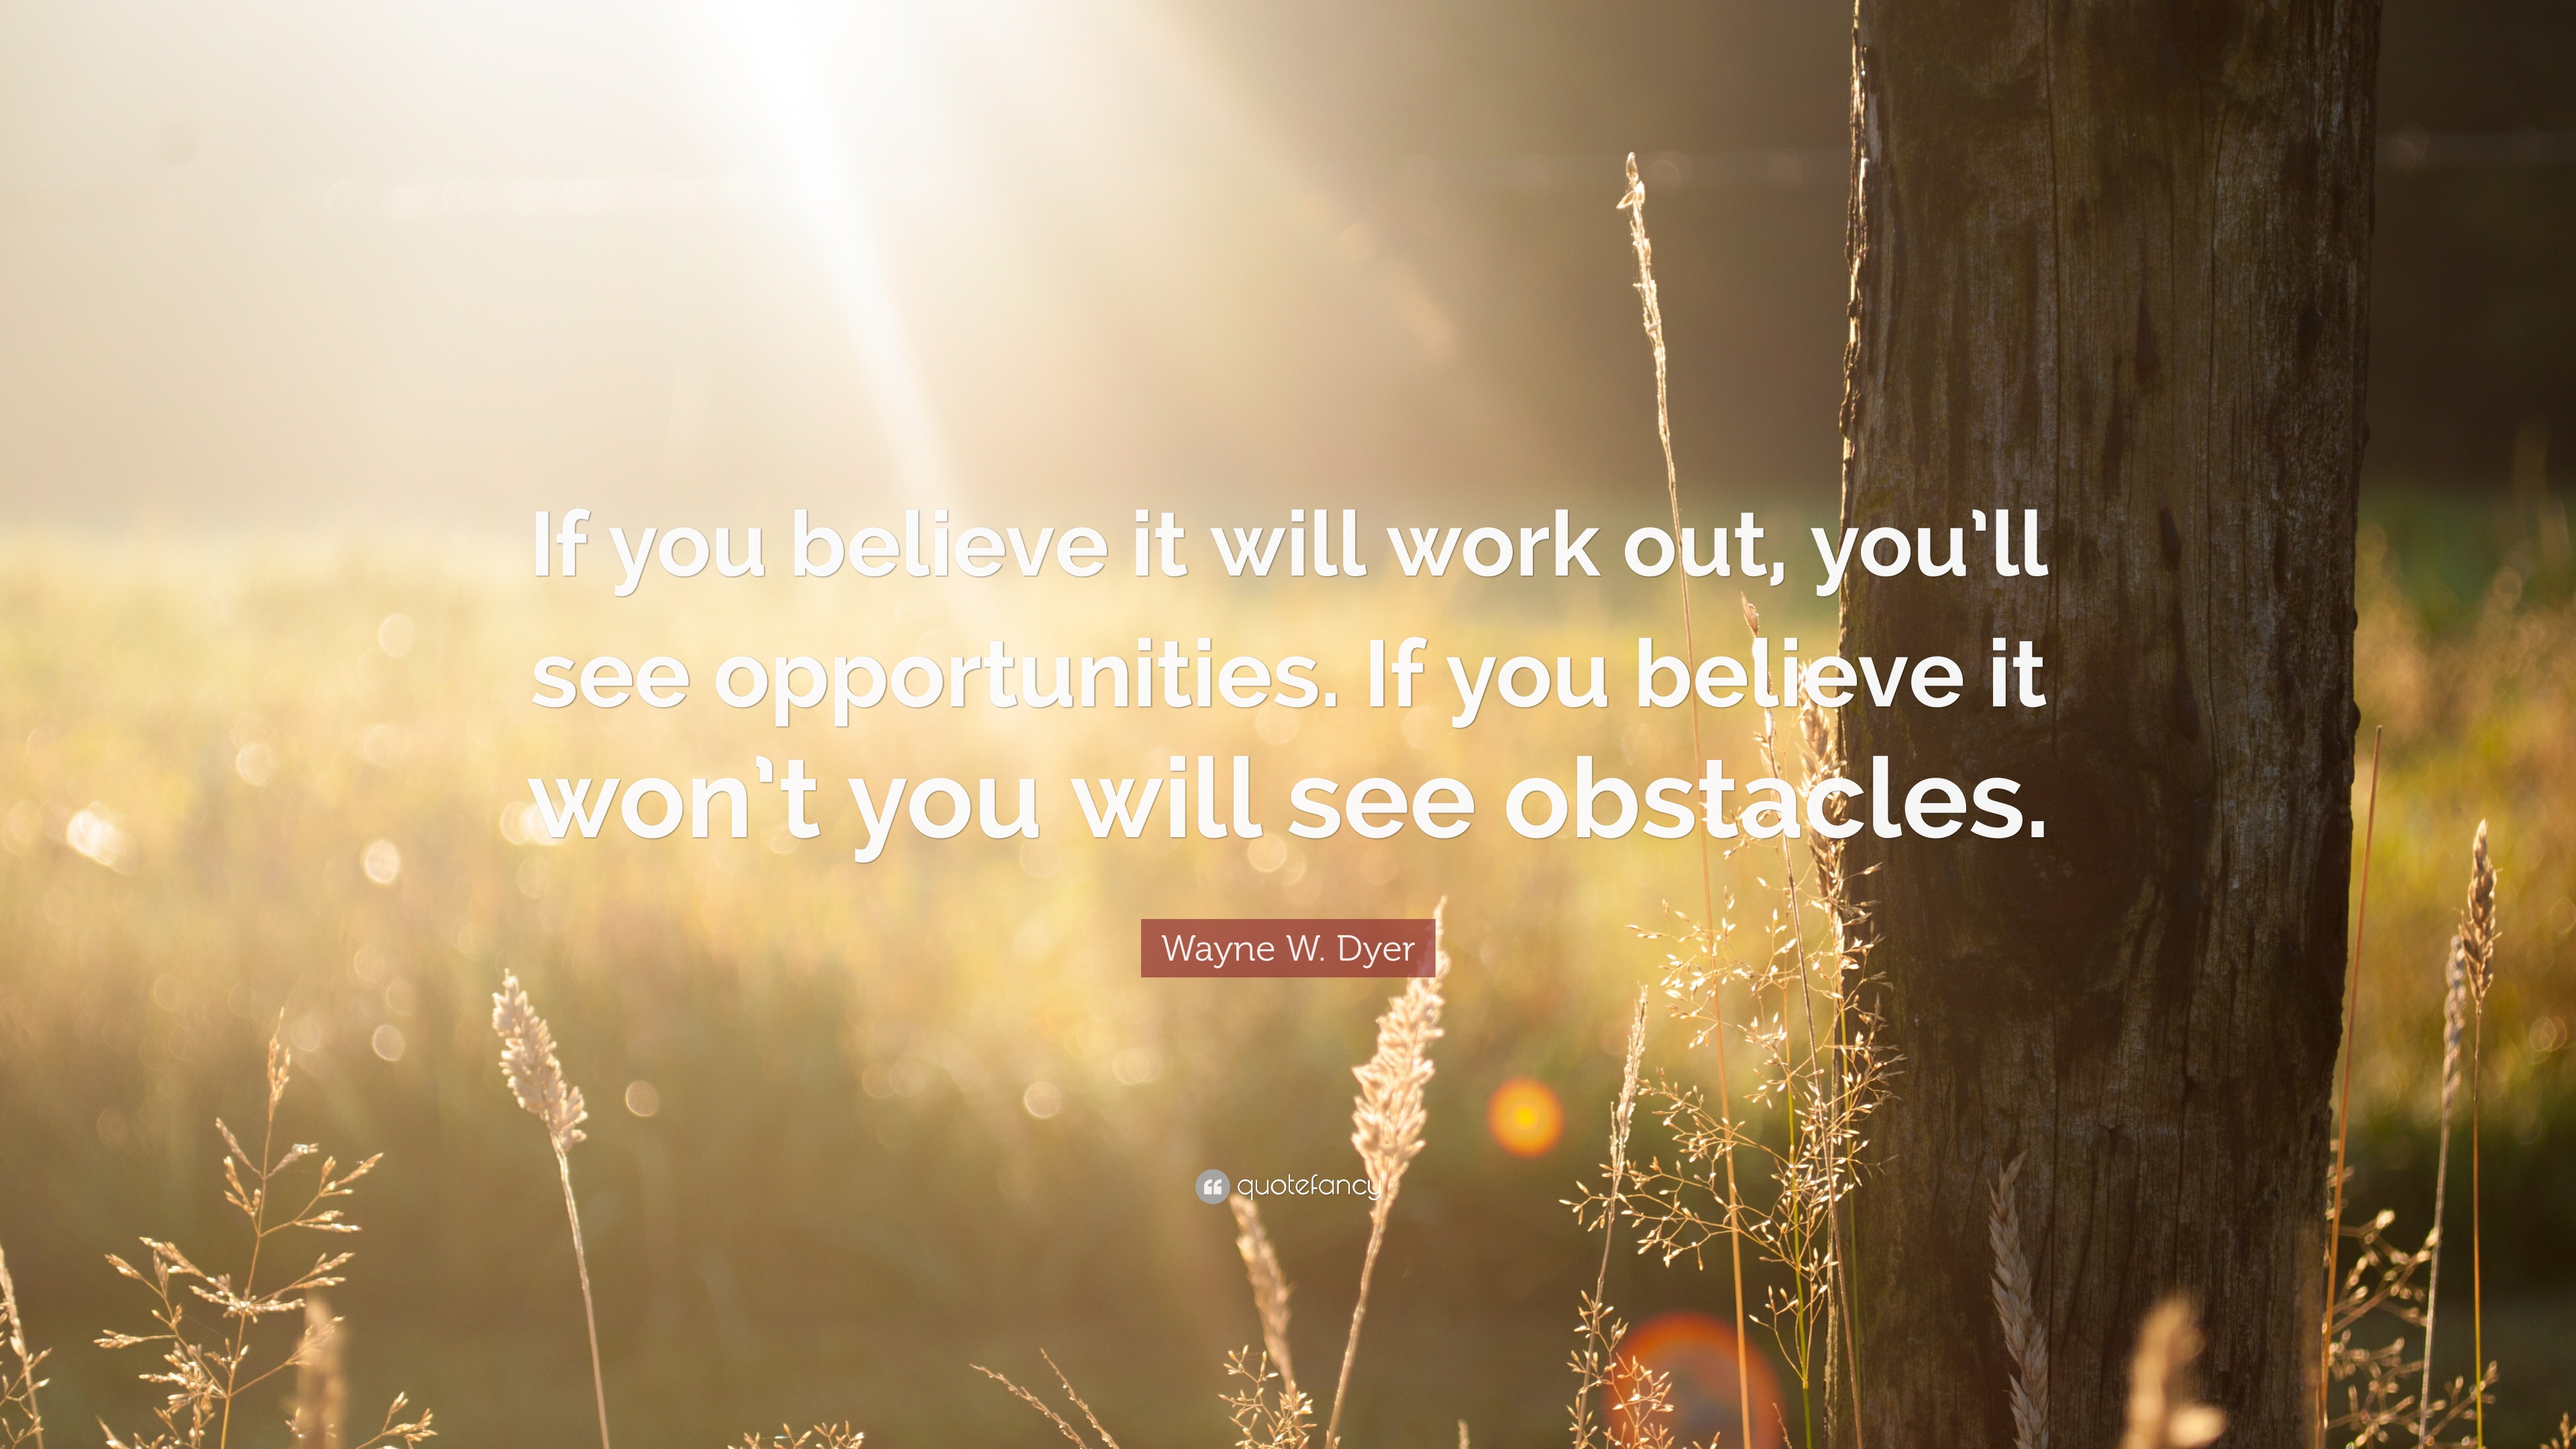 If you believe it will work out, you'll see opportunities. If you believe  it won't, you will see obstacles — Wayne Dyer, by Christian, UPChapter